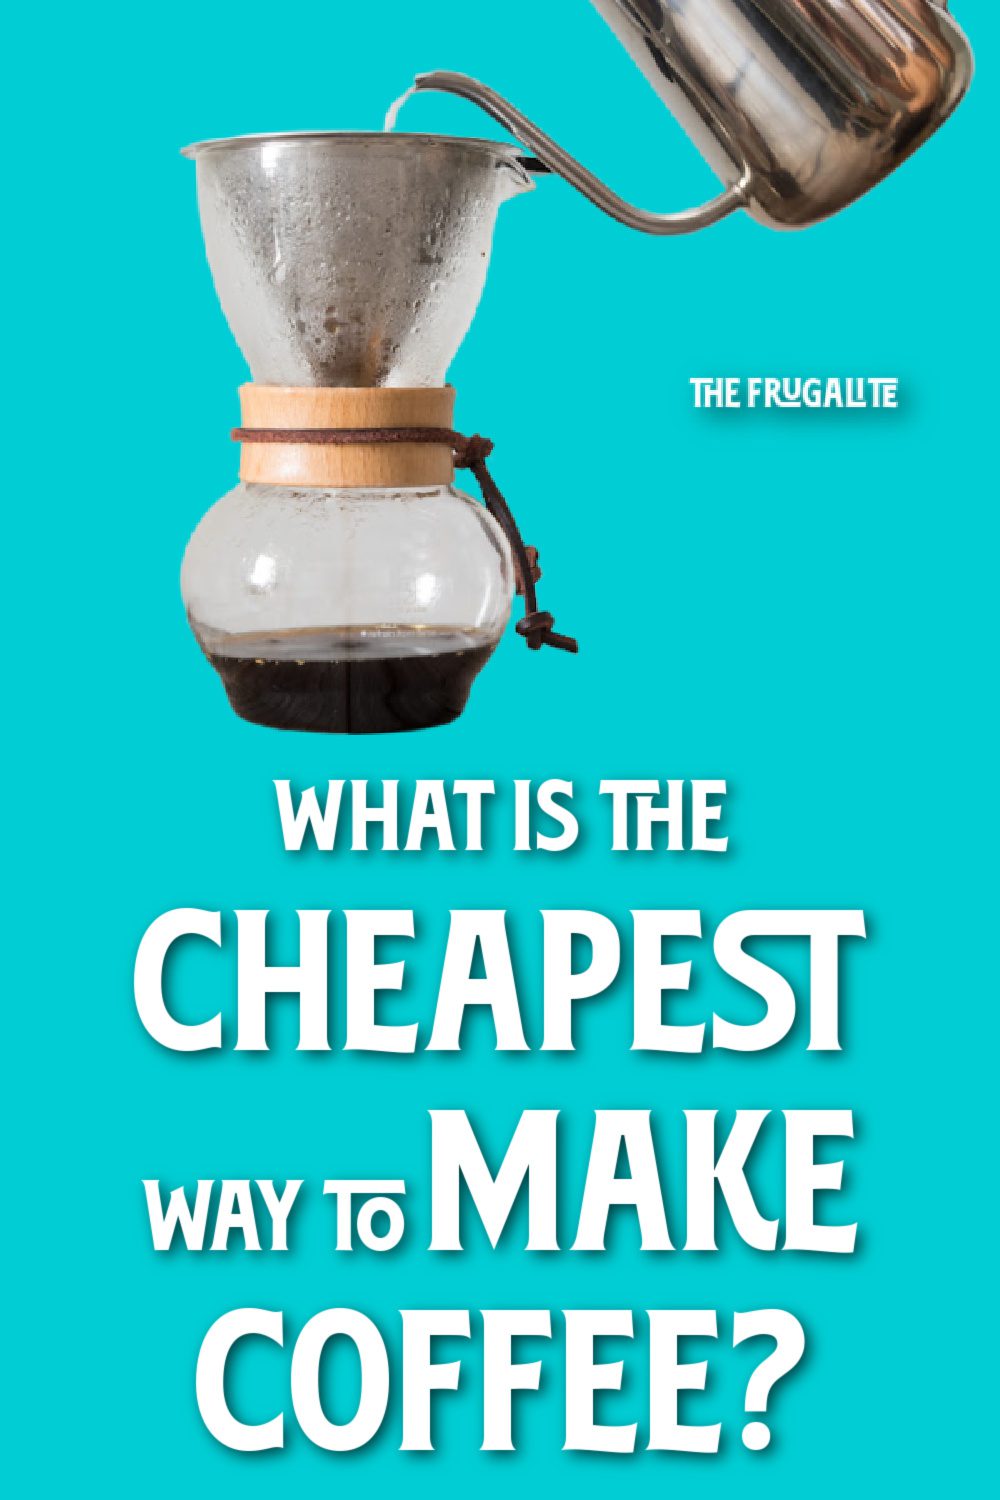 What Is the Cheapest Way to Make Coffee?